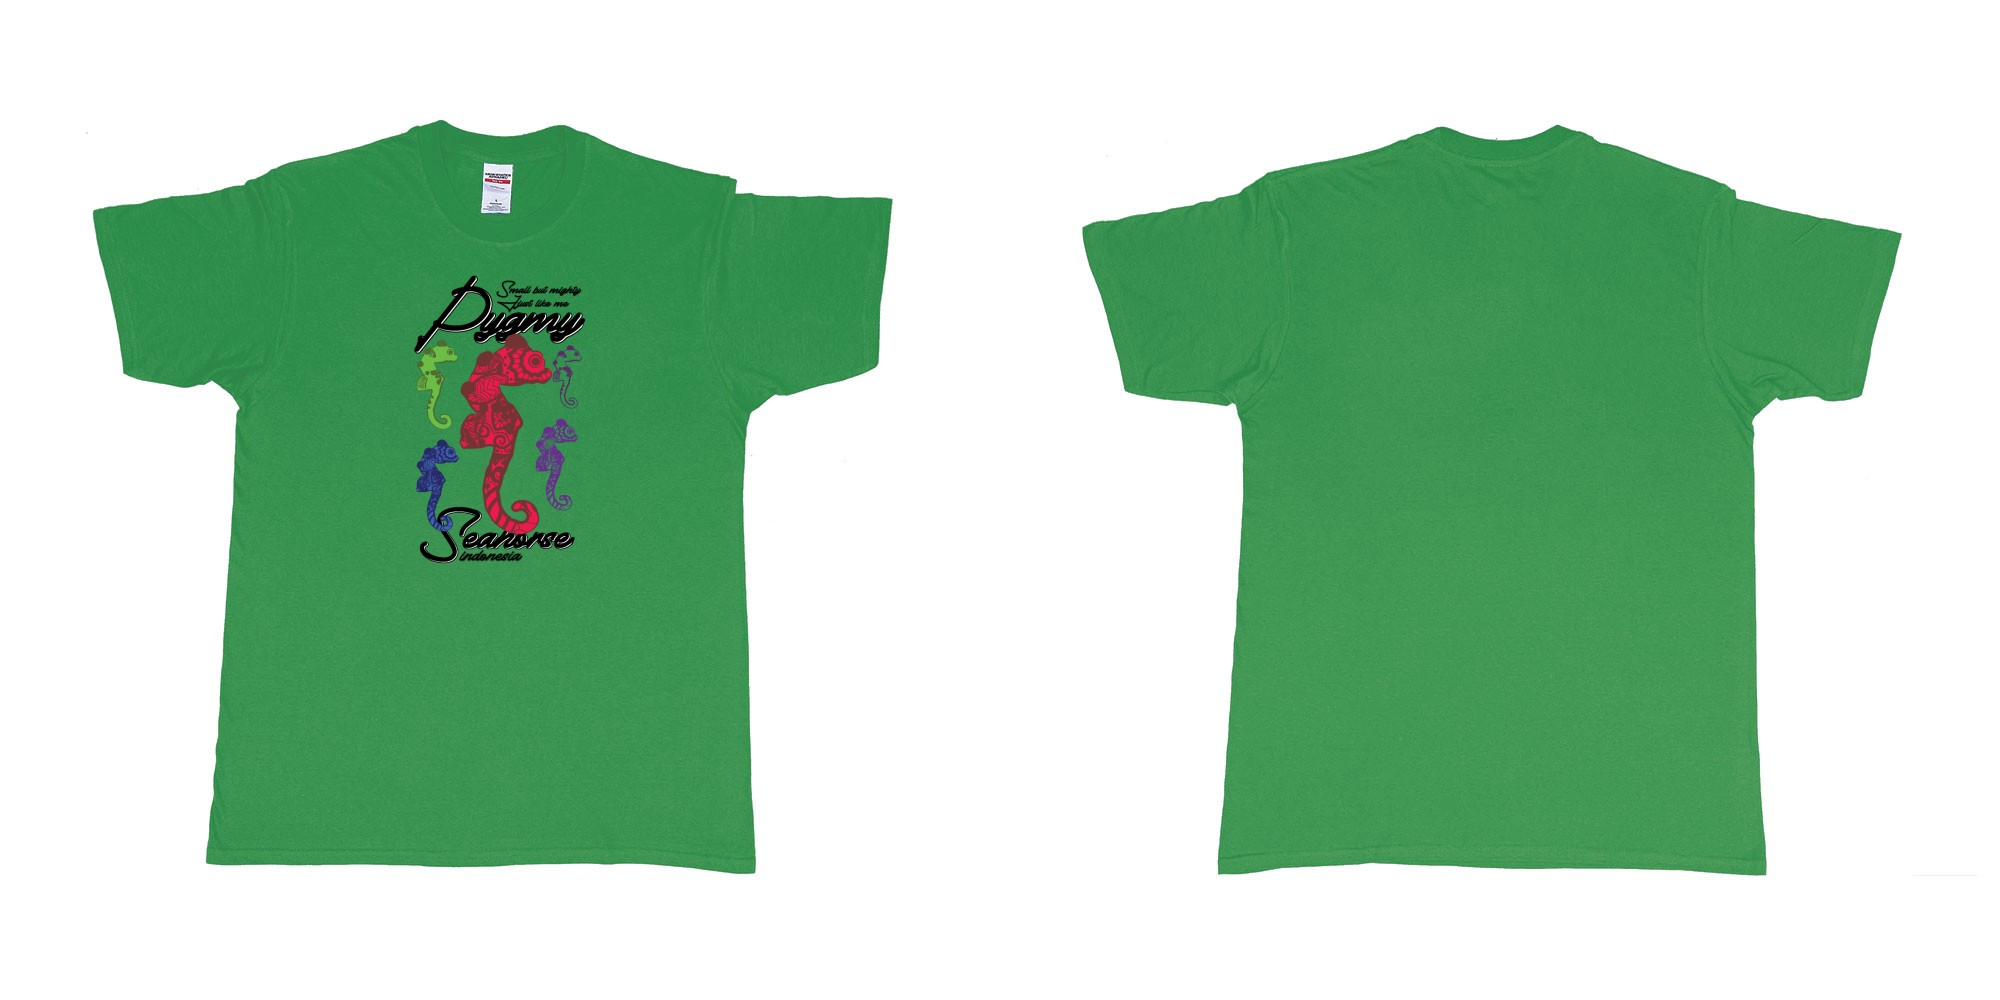 Custom tshirt design pygmy seahorse indonesia small but mighty just like me in fabric color irish-green choice your own text made in Bali by The Pirate Way